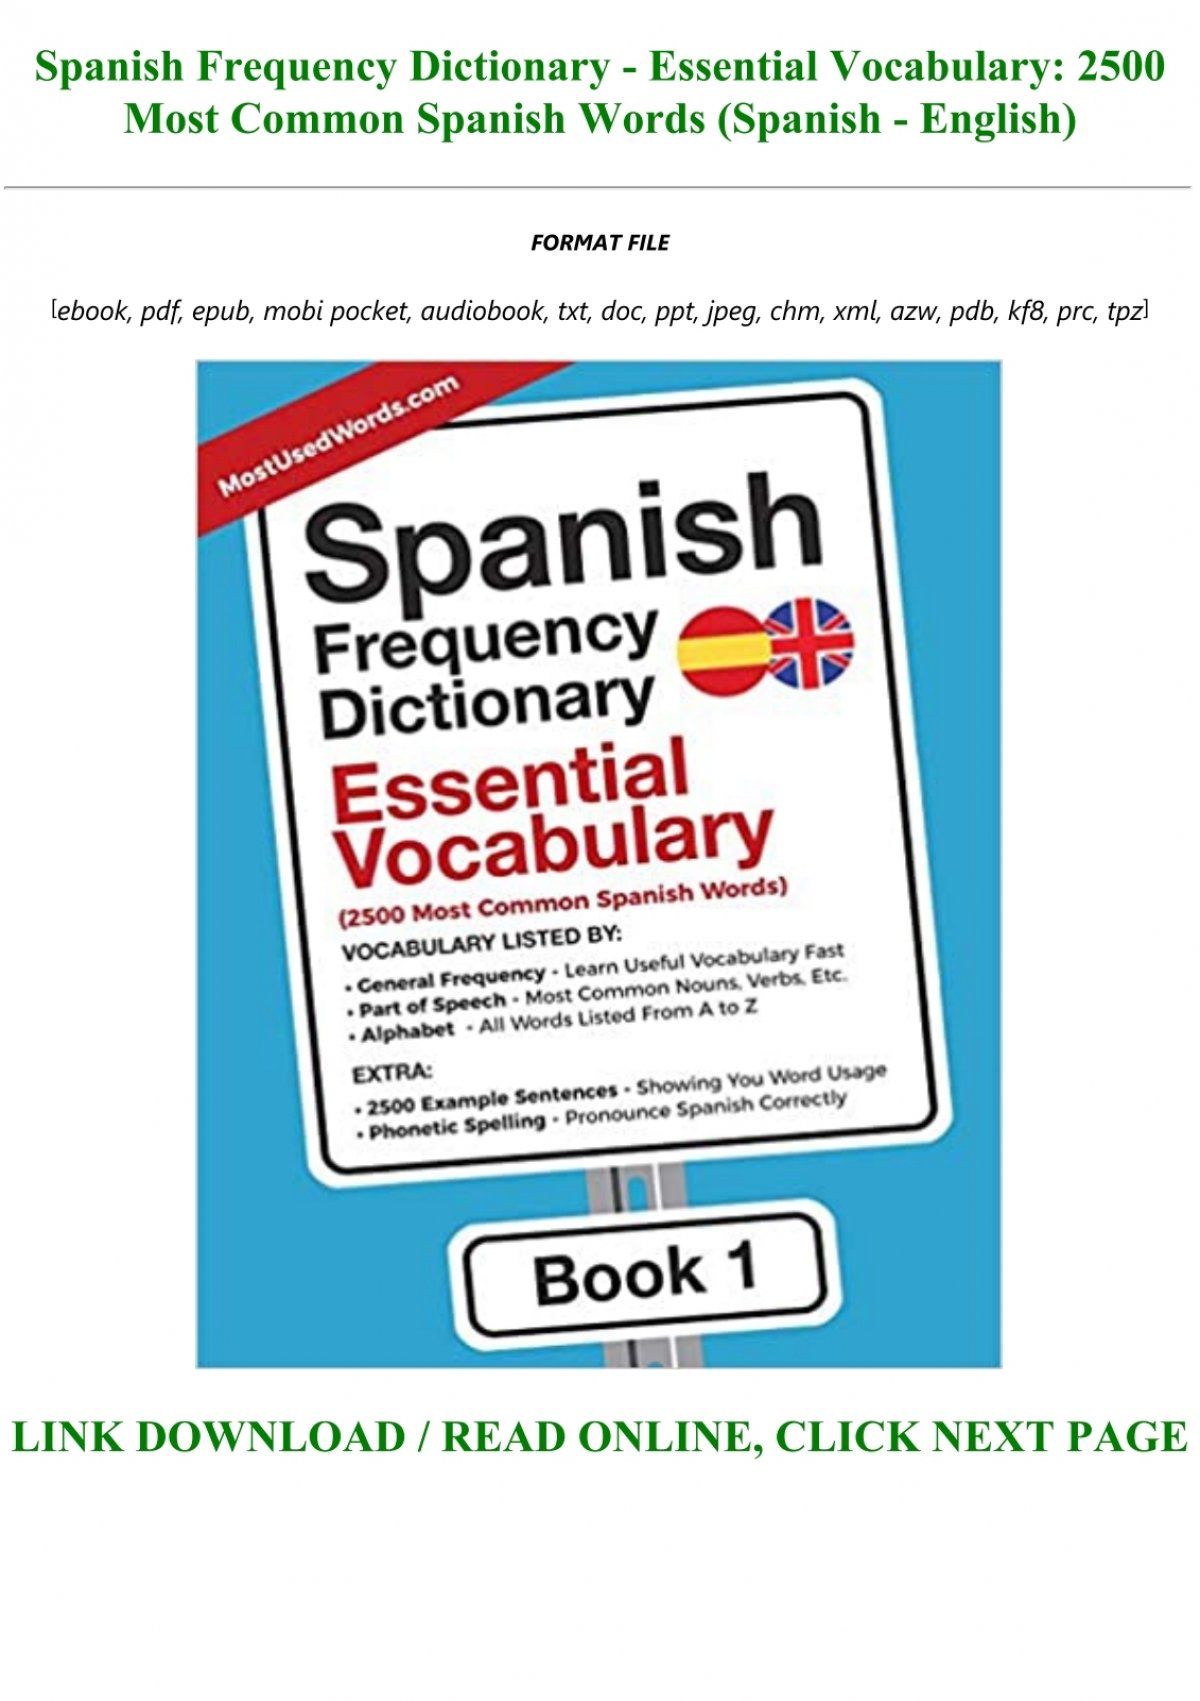 pdf-download-spanish-frequency-dictionary-essential-vocabulary-2500-most-common-spanish